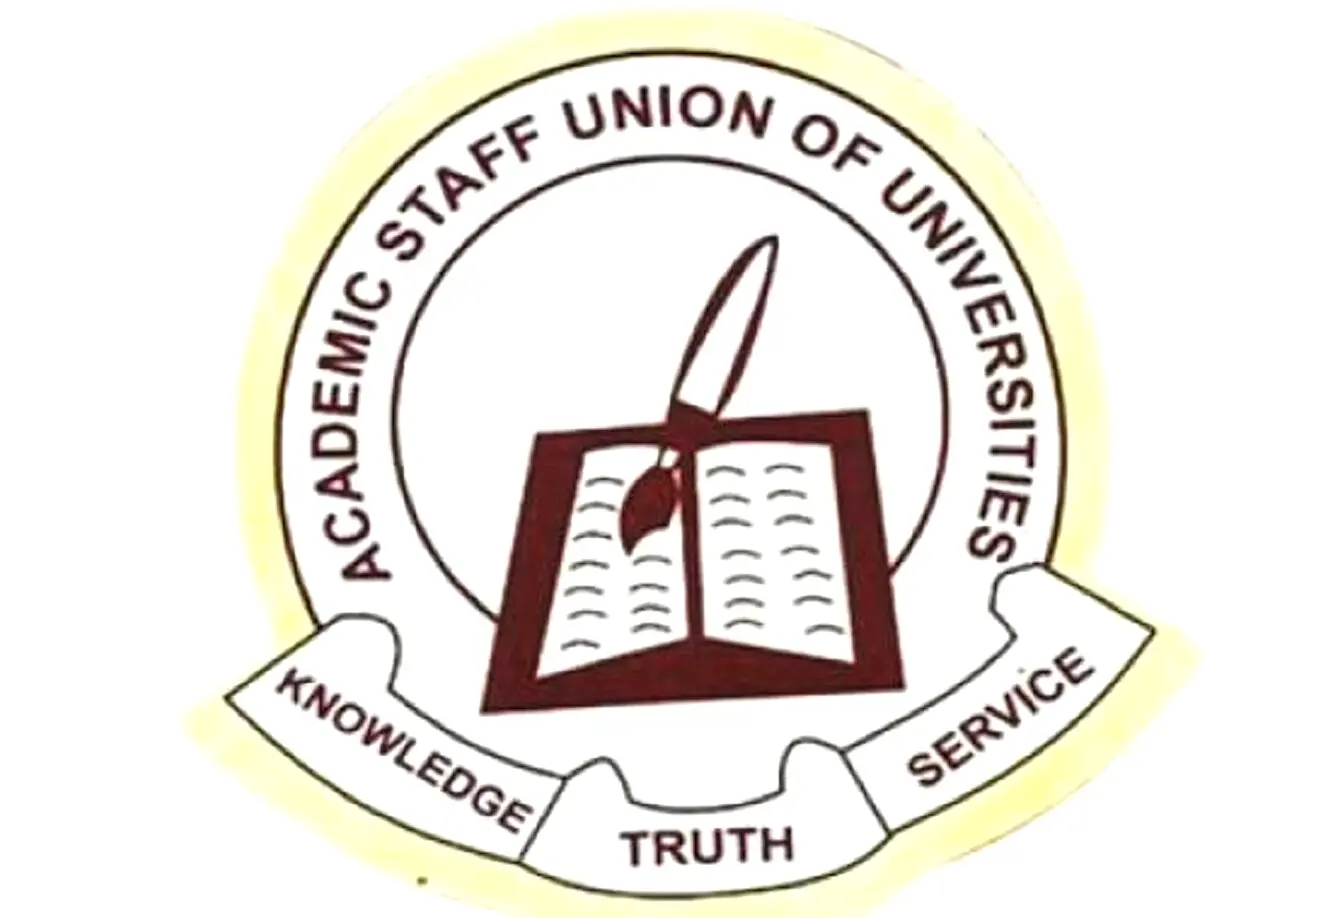  Education Minister Hopes For Resolution As Govt, ASUU Resume Reconciliation Meeting